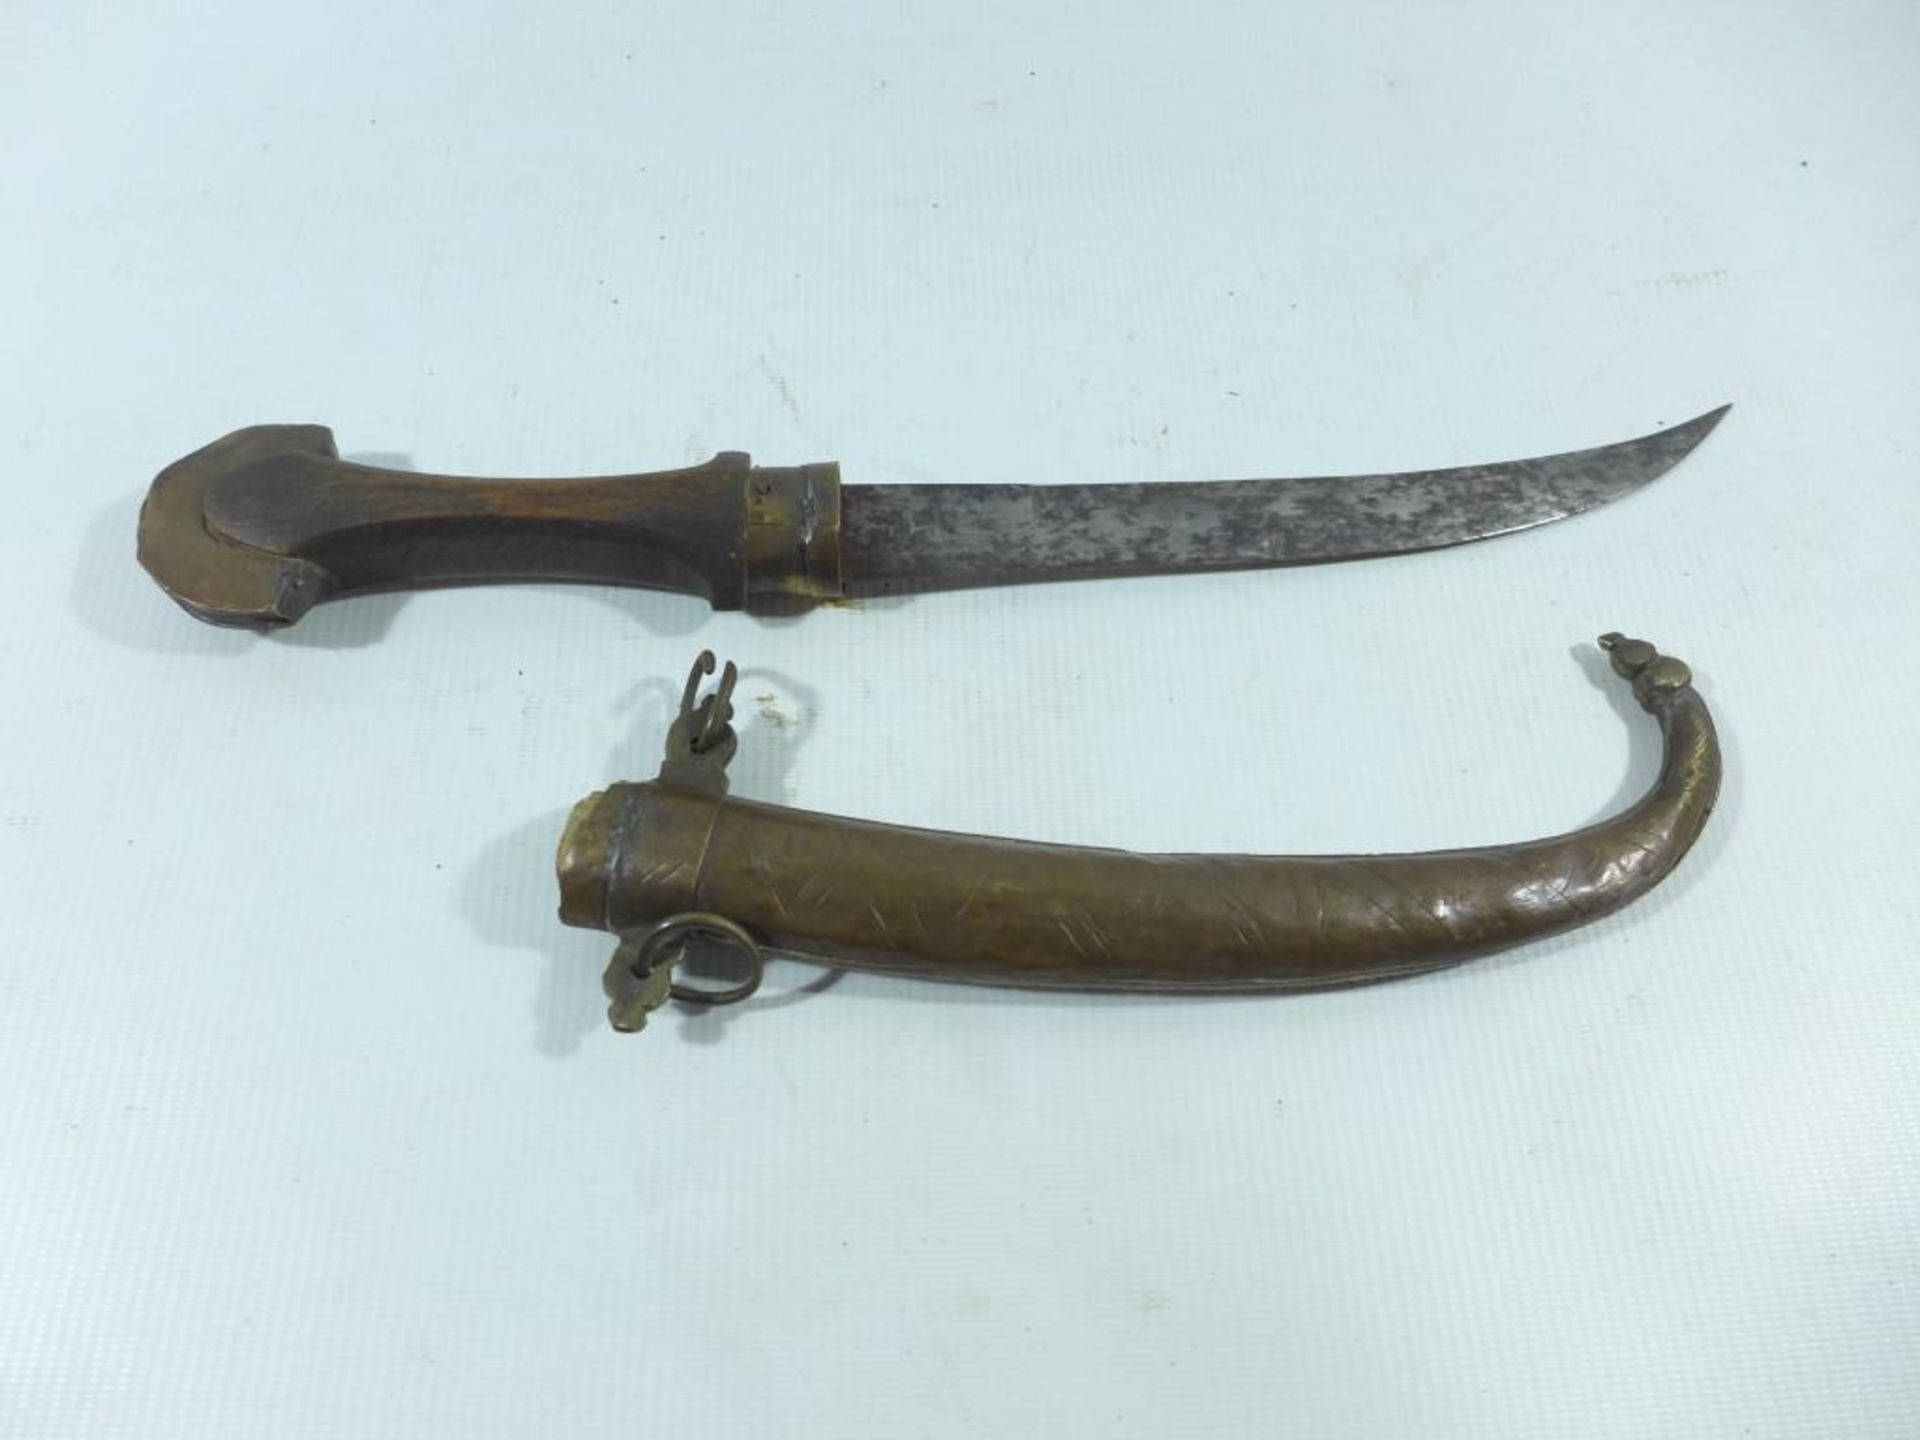 A LATE 19TH/EARLY 20TH CENTURY MOROCCAN DAGGER AND SCABBARD, 24CM BLADE - Image 2 of 4